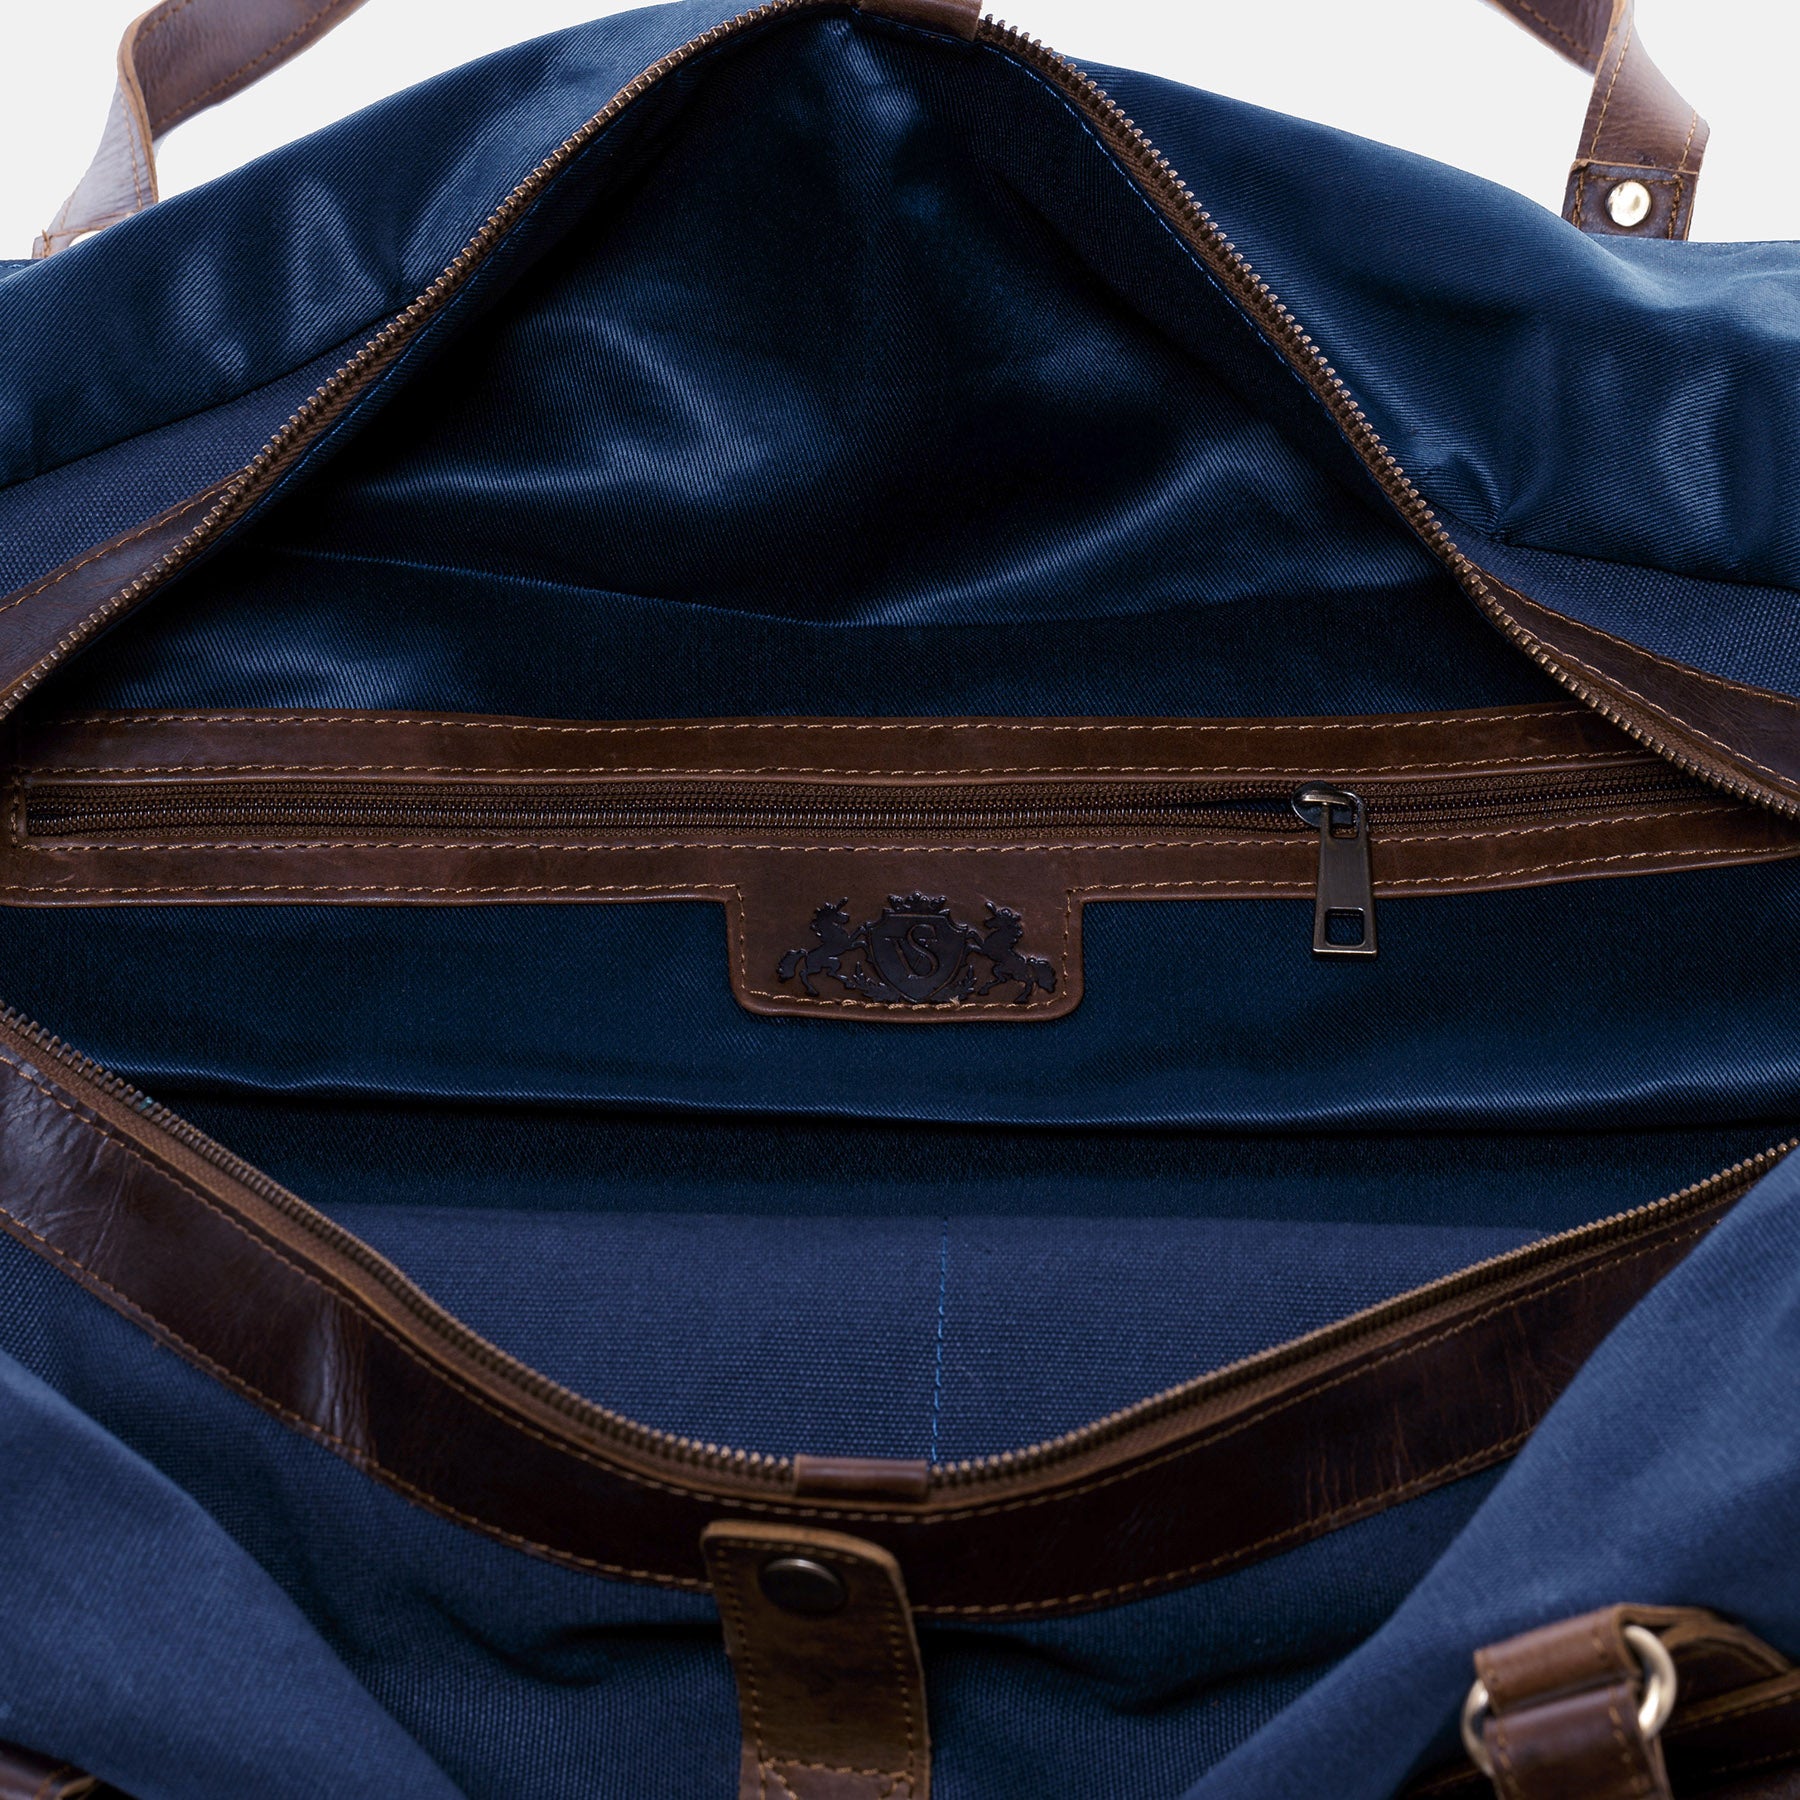 XL Travel bag CHASE Canvas&Leather blue-brown